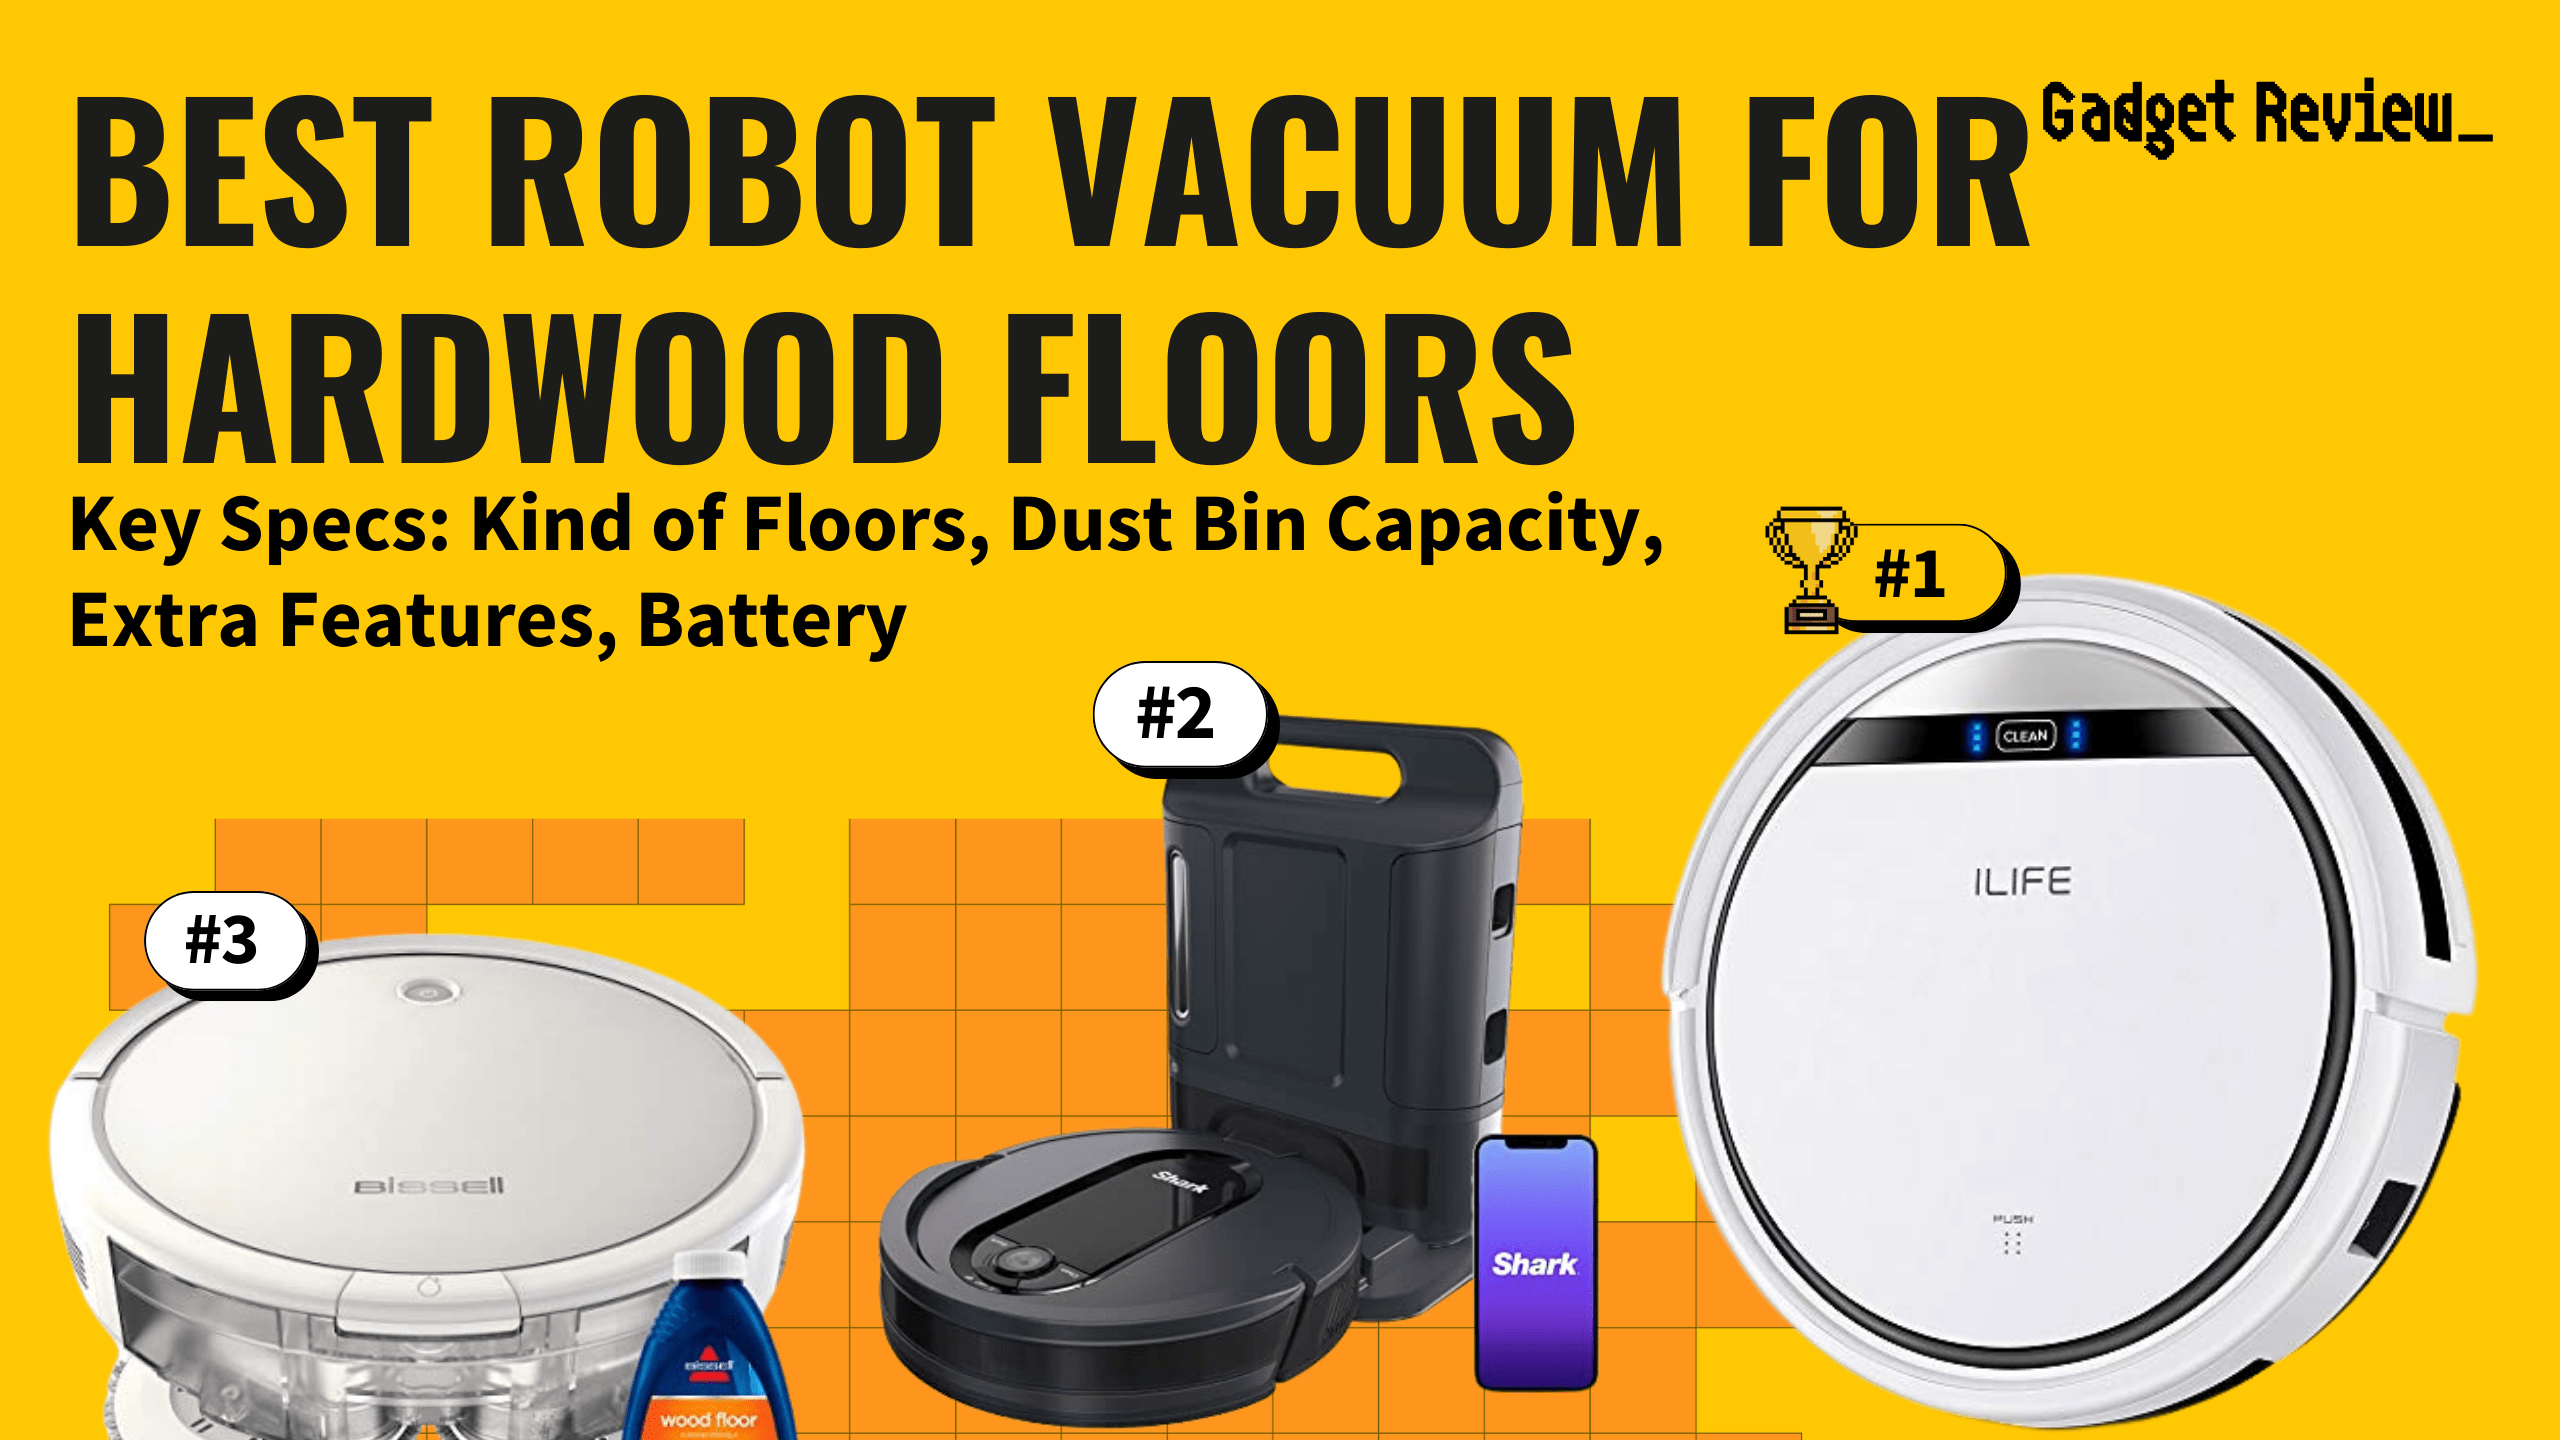 best robot vacuum for hardwood floors featured image that shows the top three best robot vacuum models